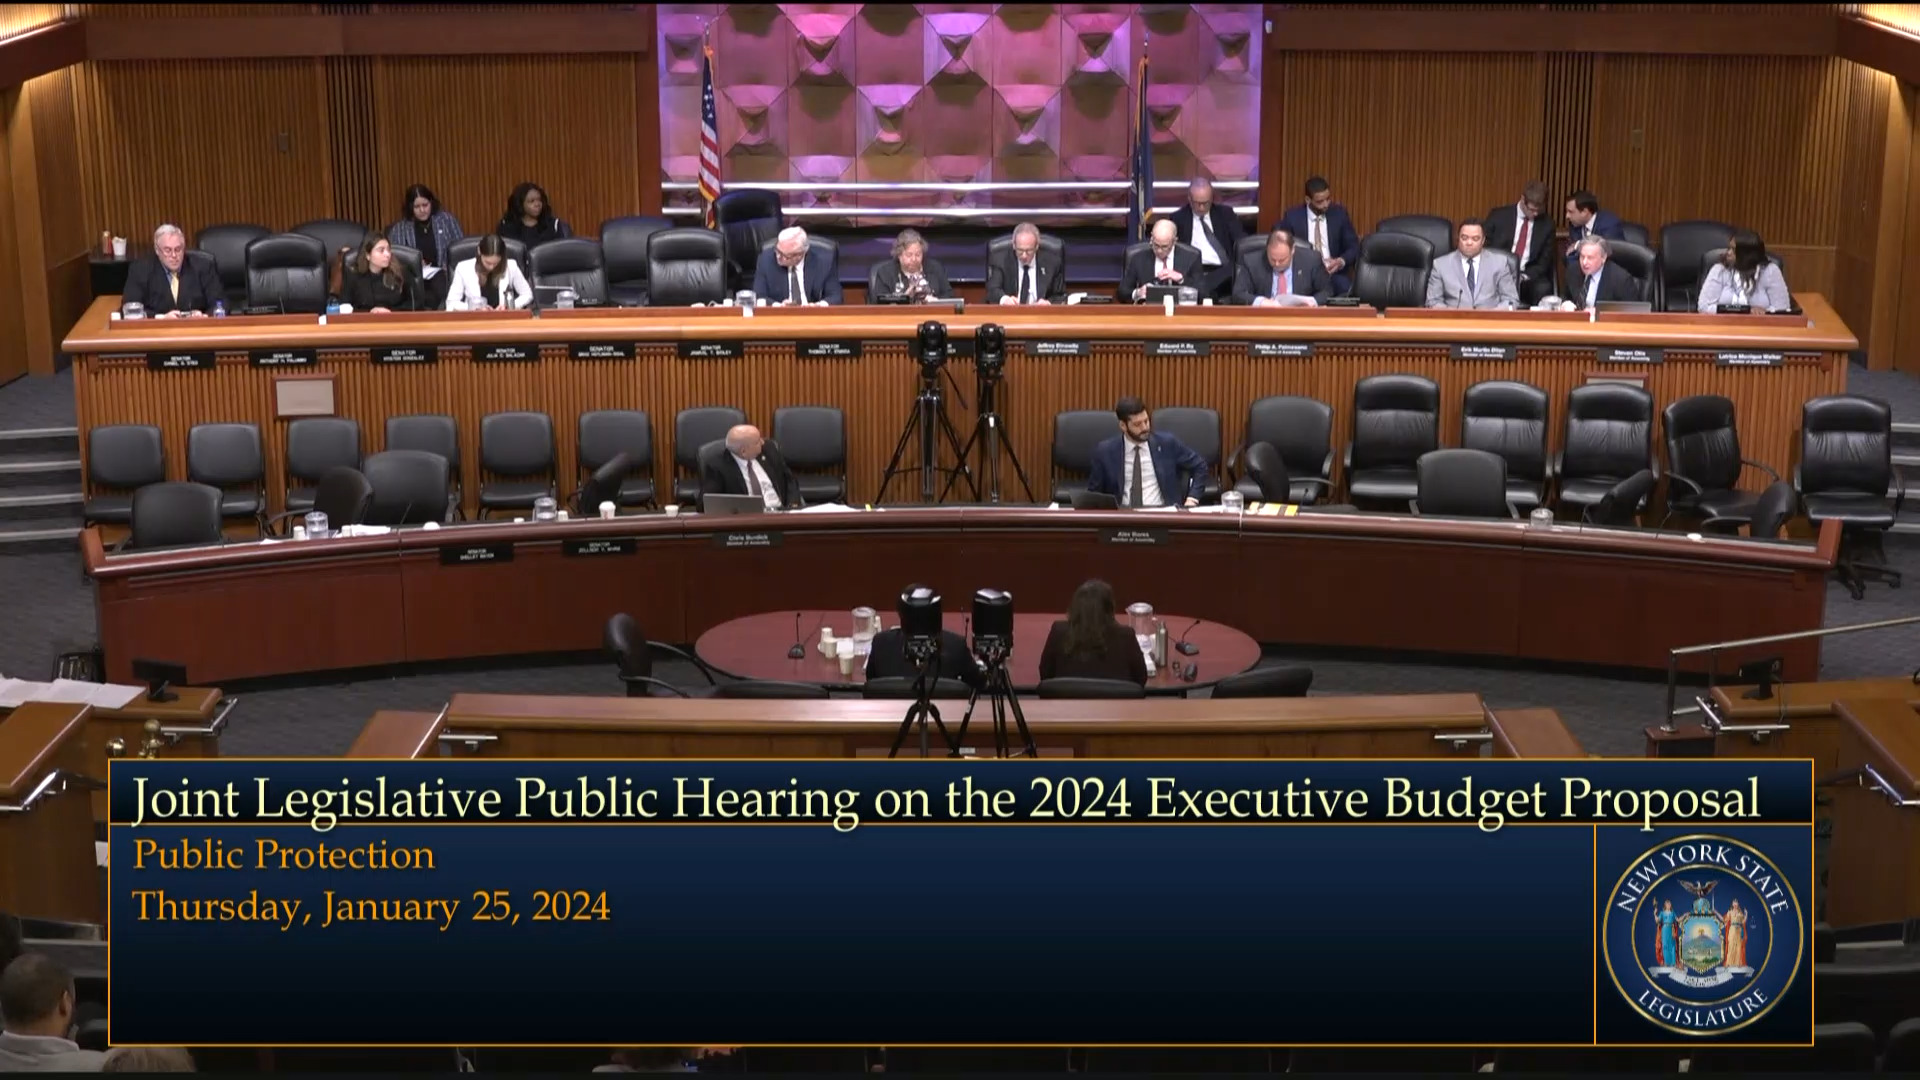 Homeland Security Commissioner and CI Officer Testifies During a Joint Budget Hearing on Public Protection